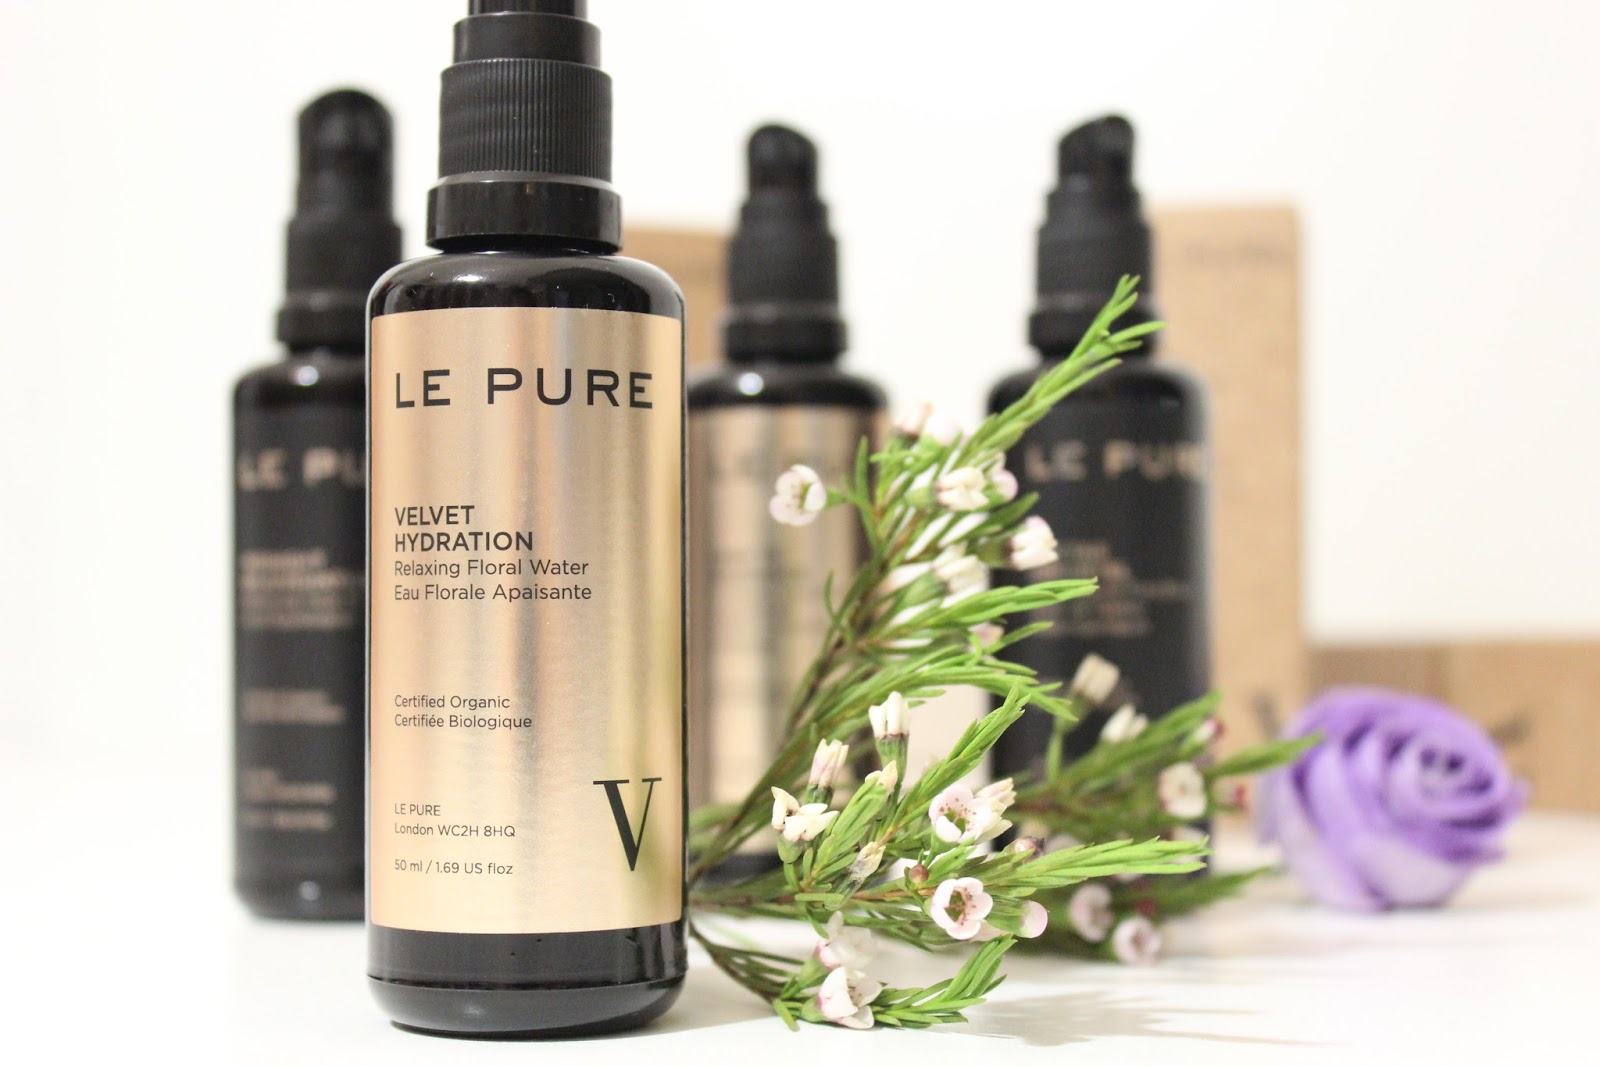 Lauralicious: Le Pure "Let your skin breathe"